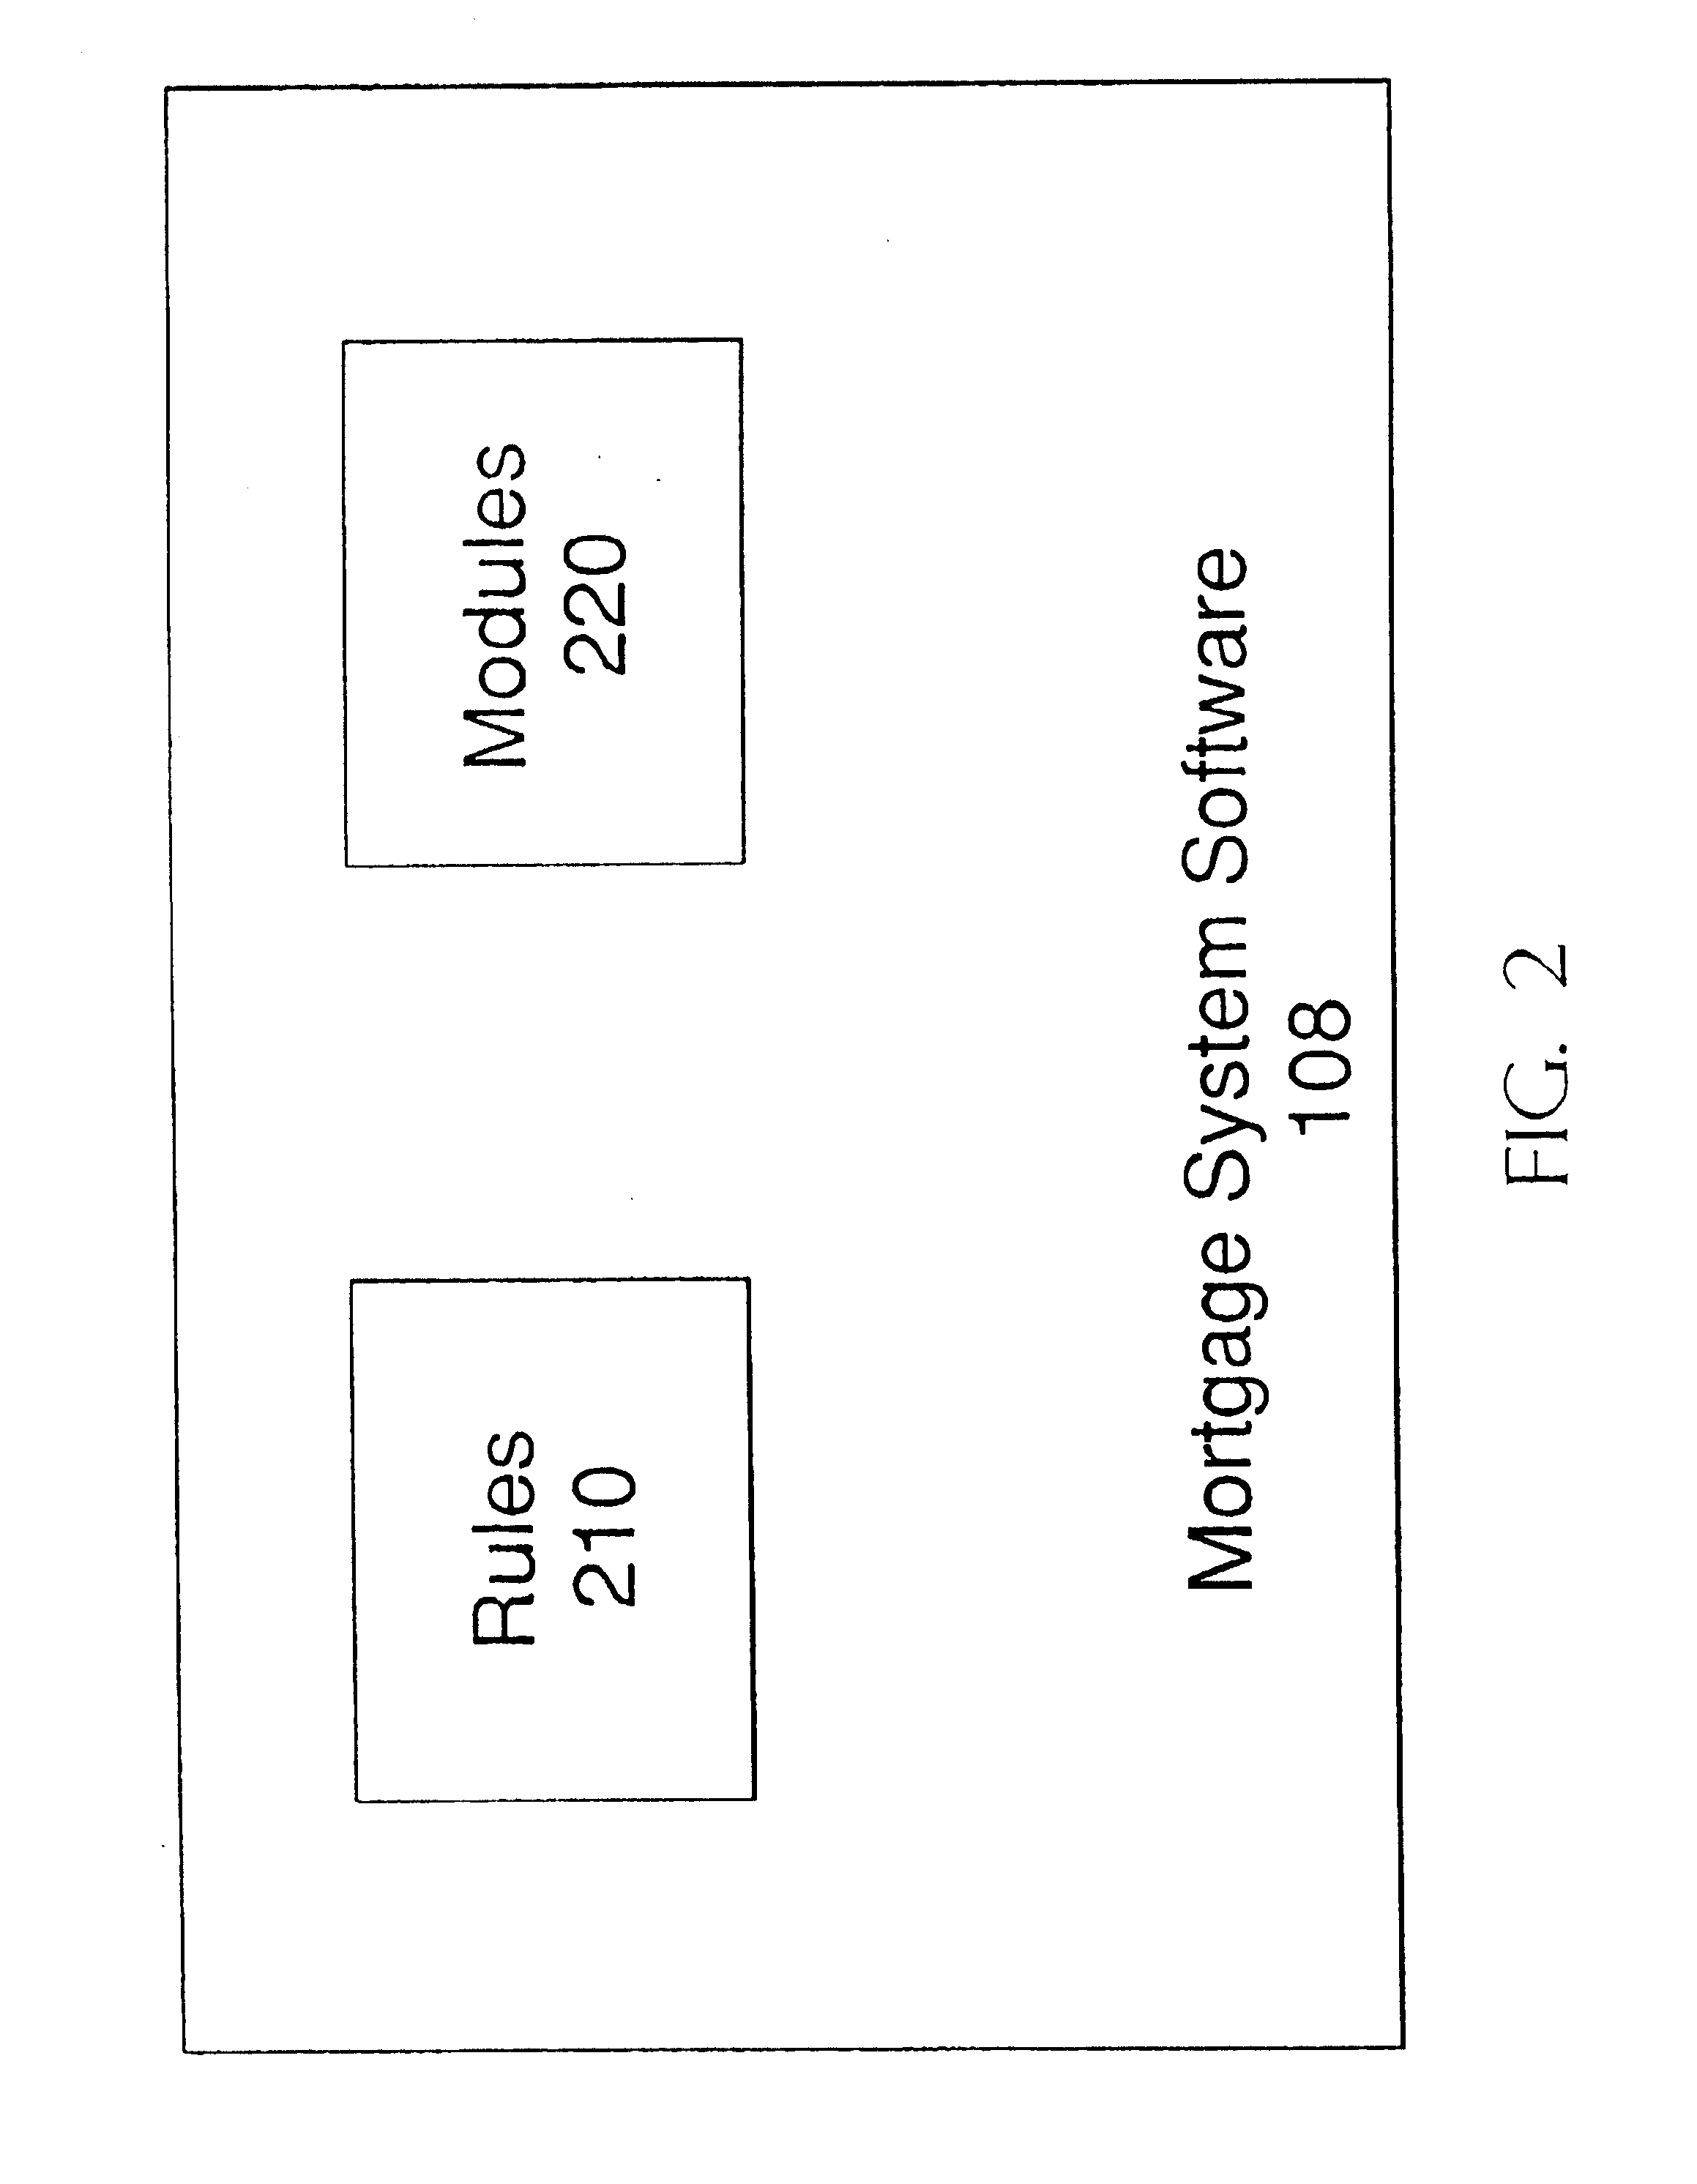 System and method for automated process of deal structuring